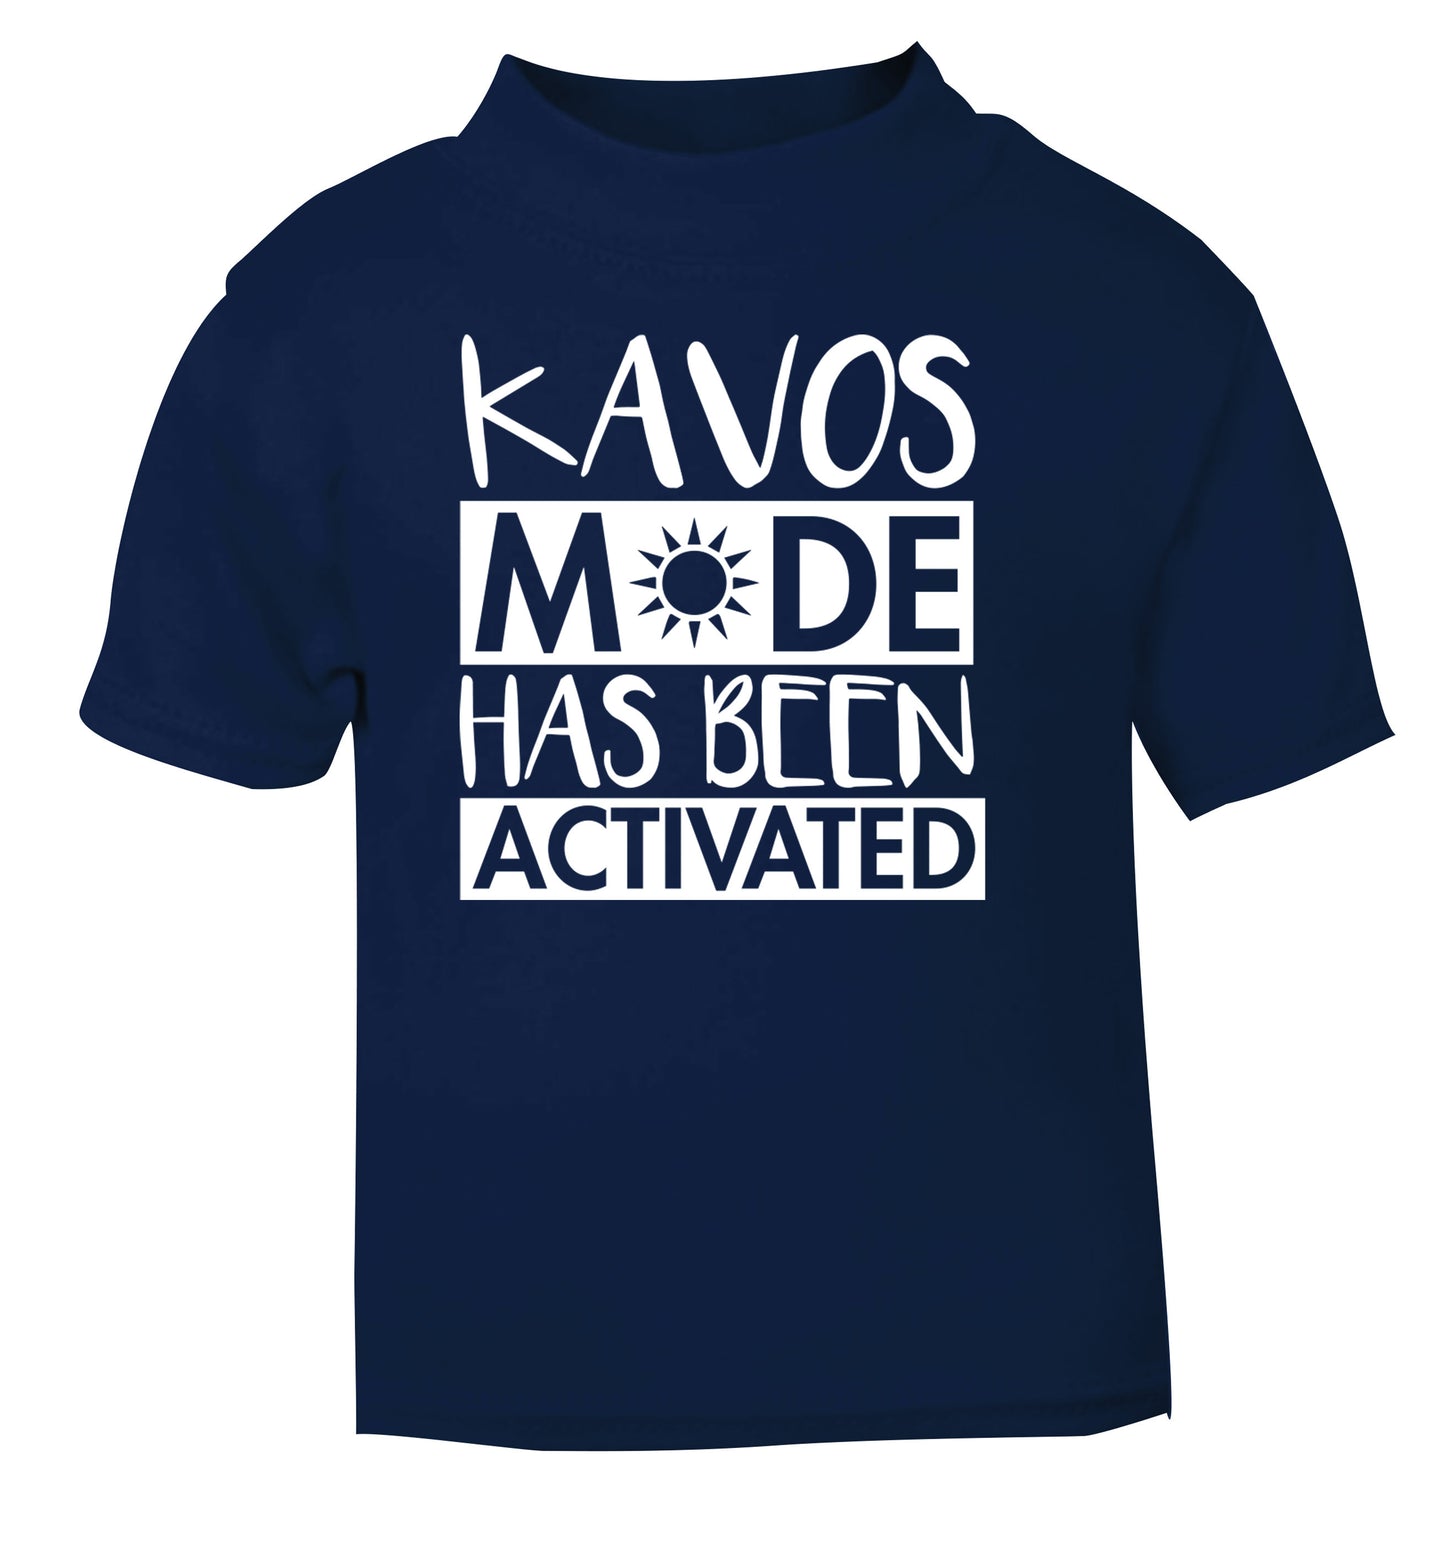 Kavos mode has been activated navy Baby Toddler Tshirt 2 Years